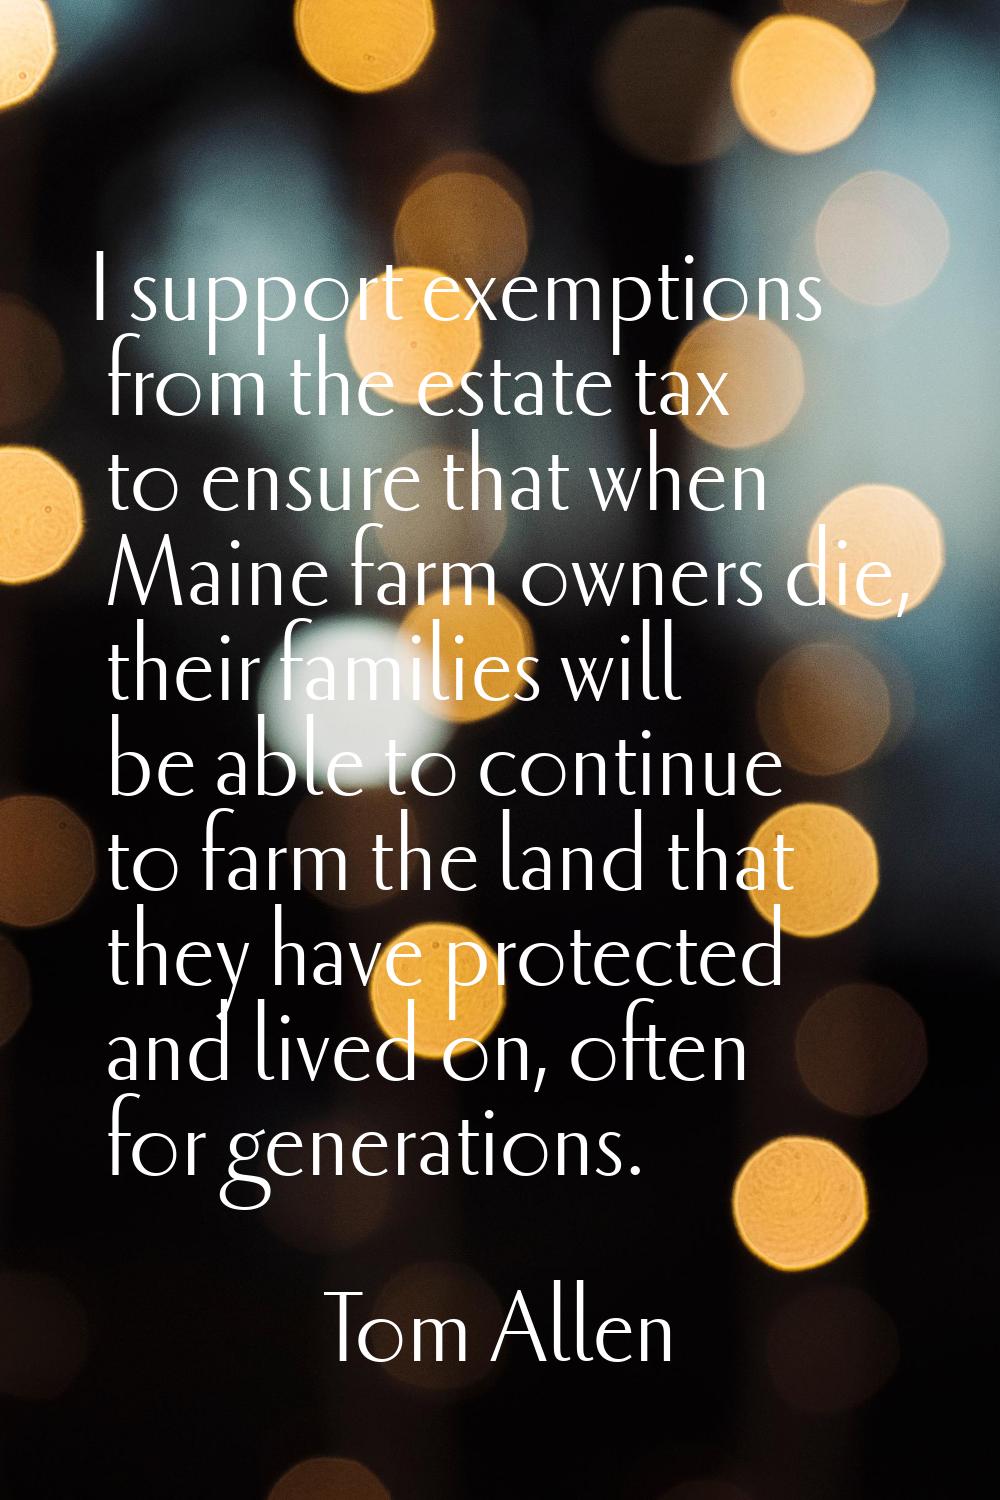 I support exemptions from the estate tax to ensure that when Maine farm owners die, their families 